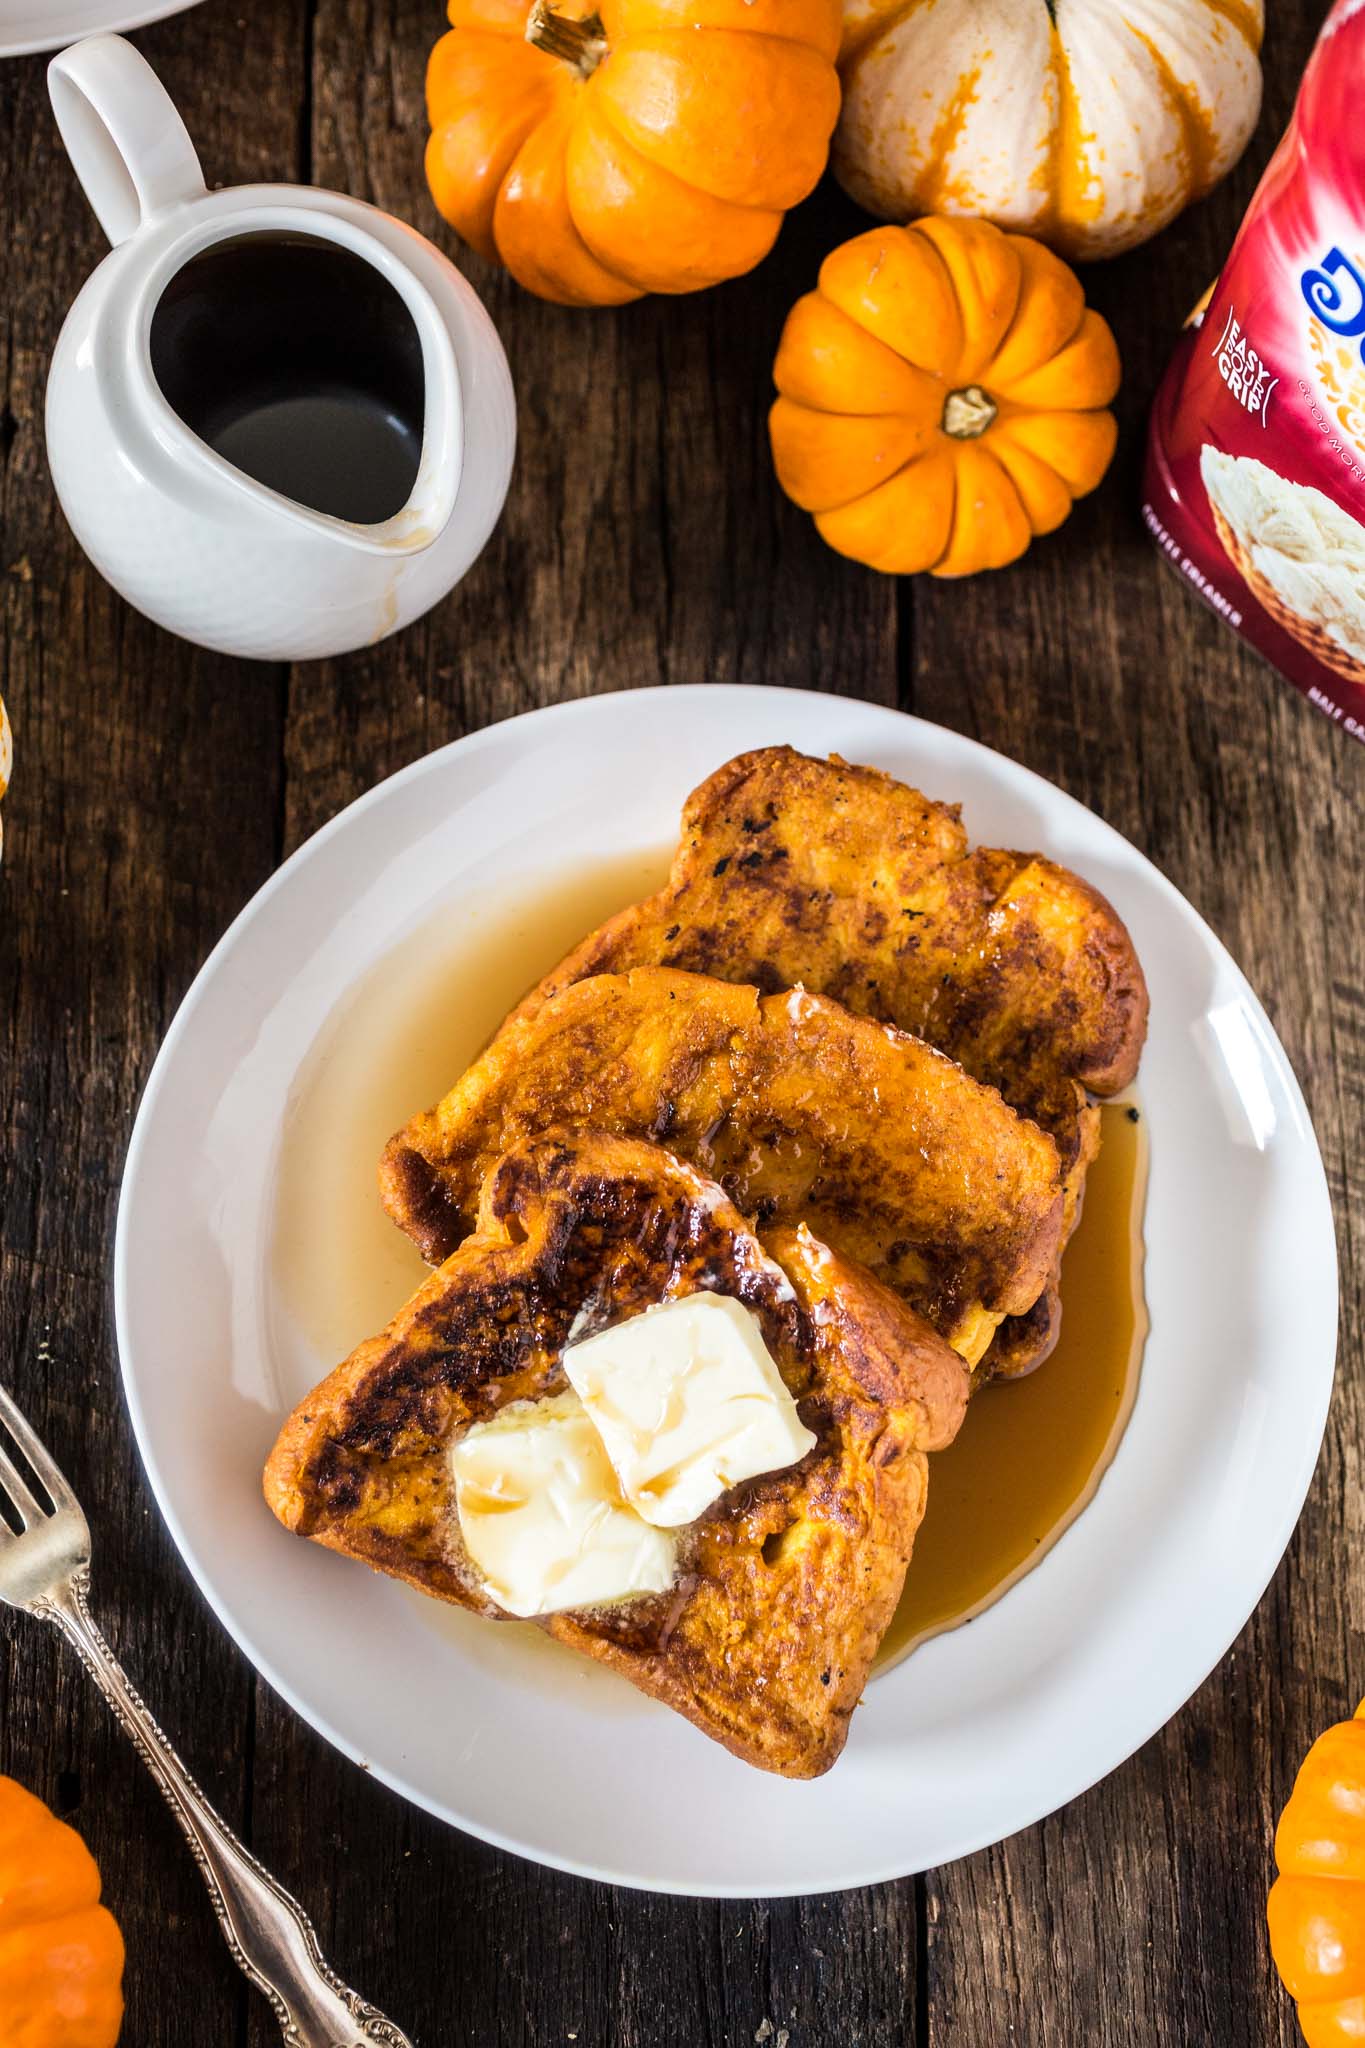 Pumpkin French Toast | www.oliviascuisine.com | This Pumpkin French Toast is the perfect Fall breakfast! Easy, delicious and coated in everybody’s favorite autumnal ingredient: pumpkin, of course.